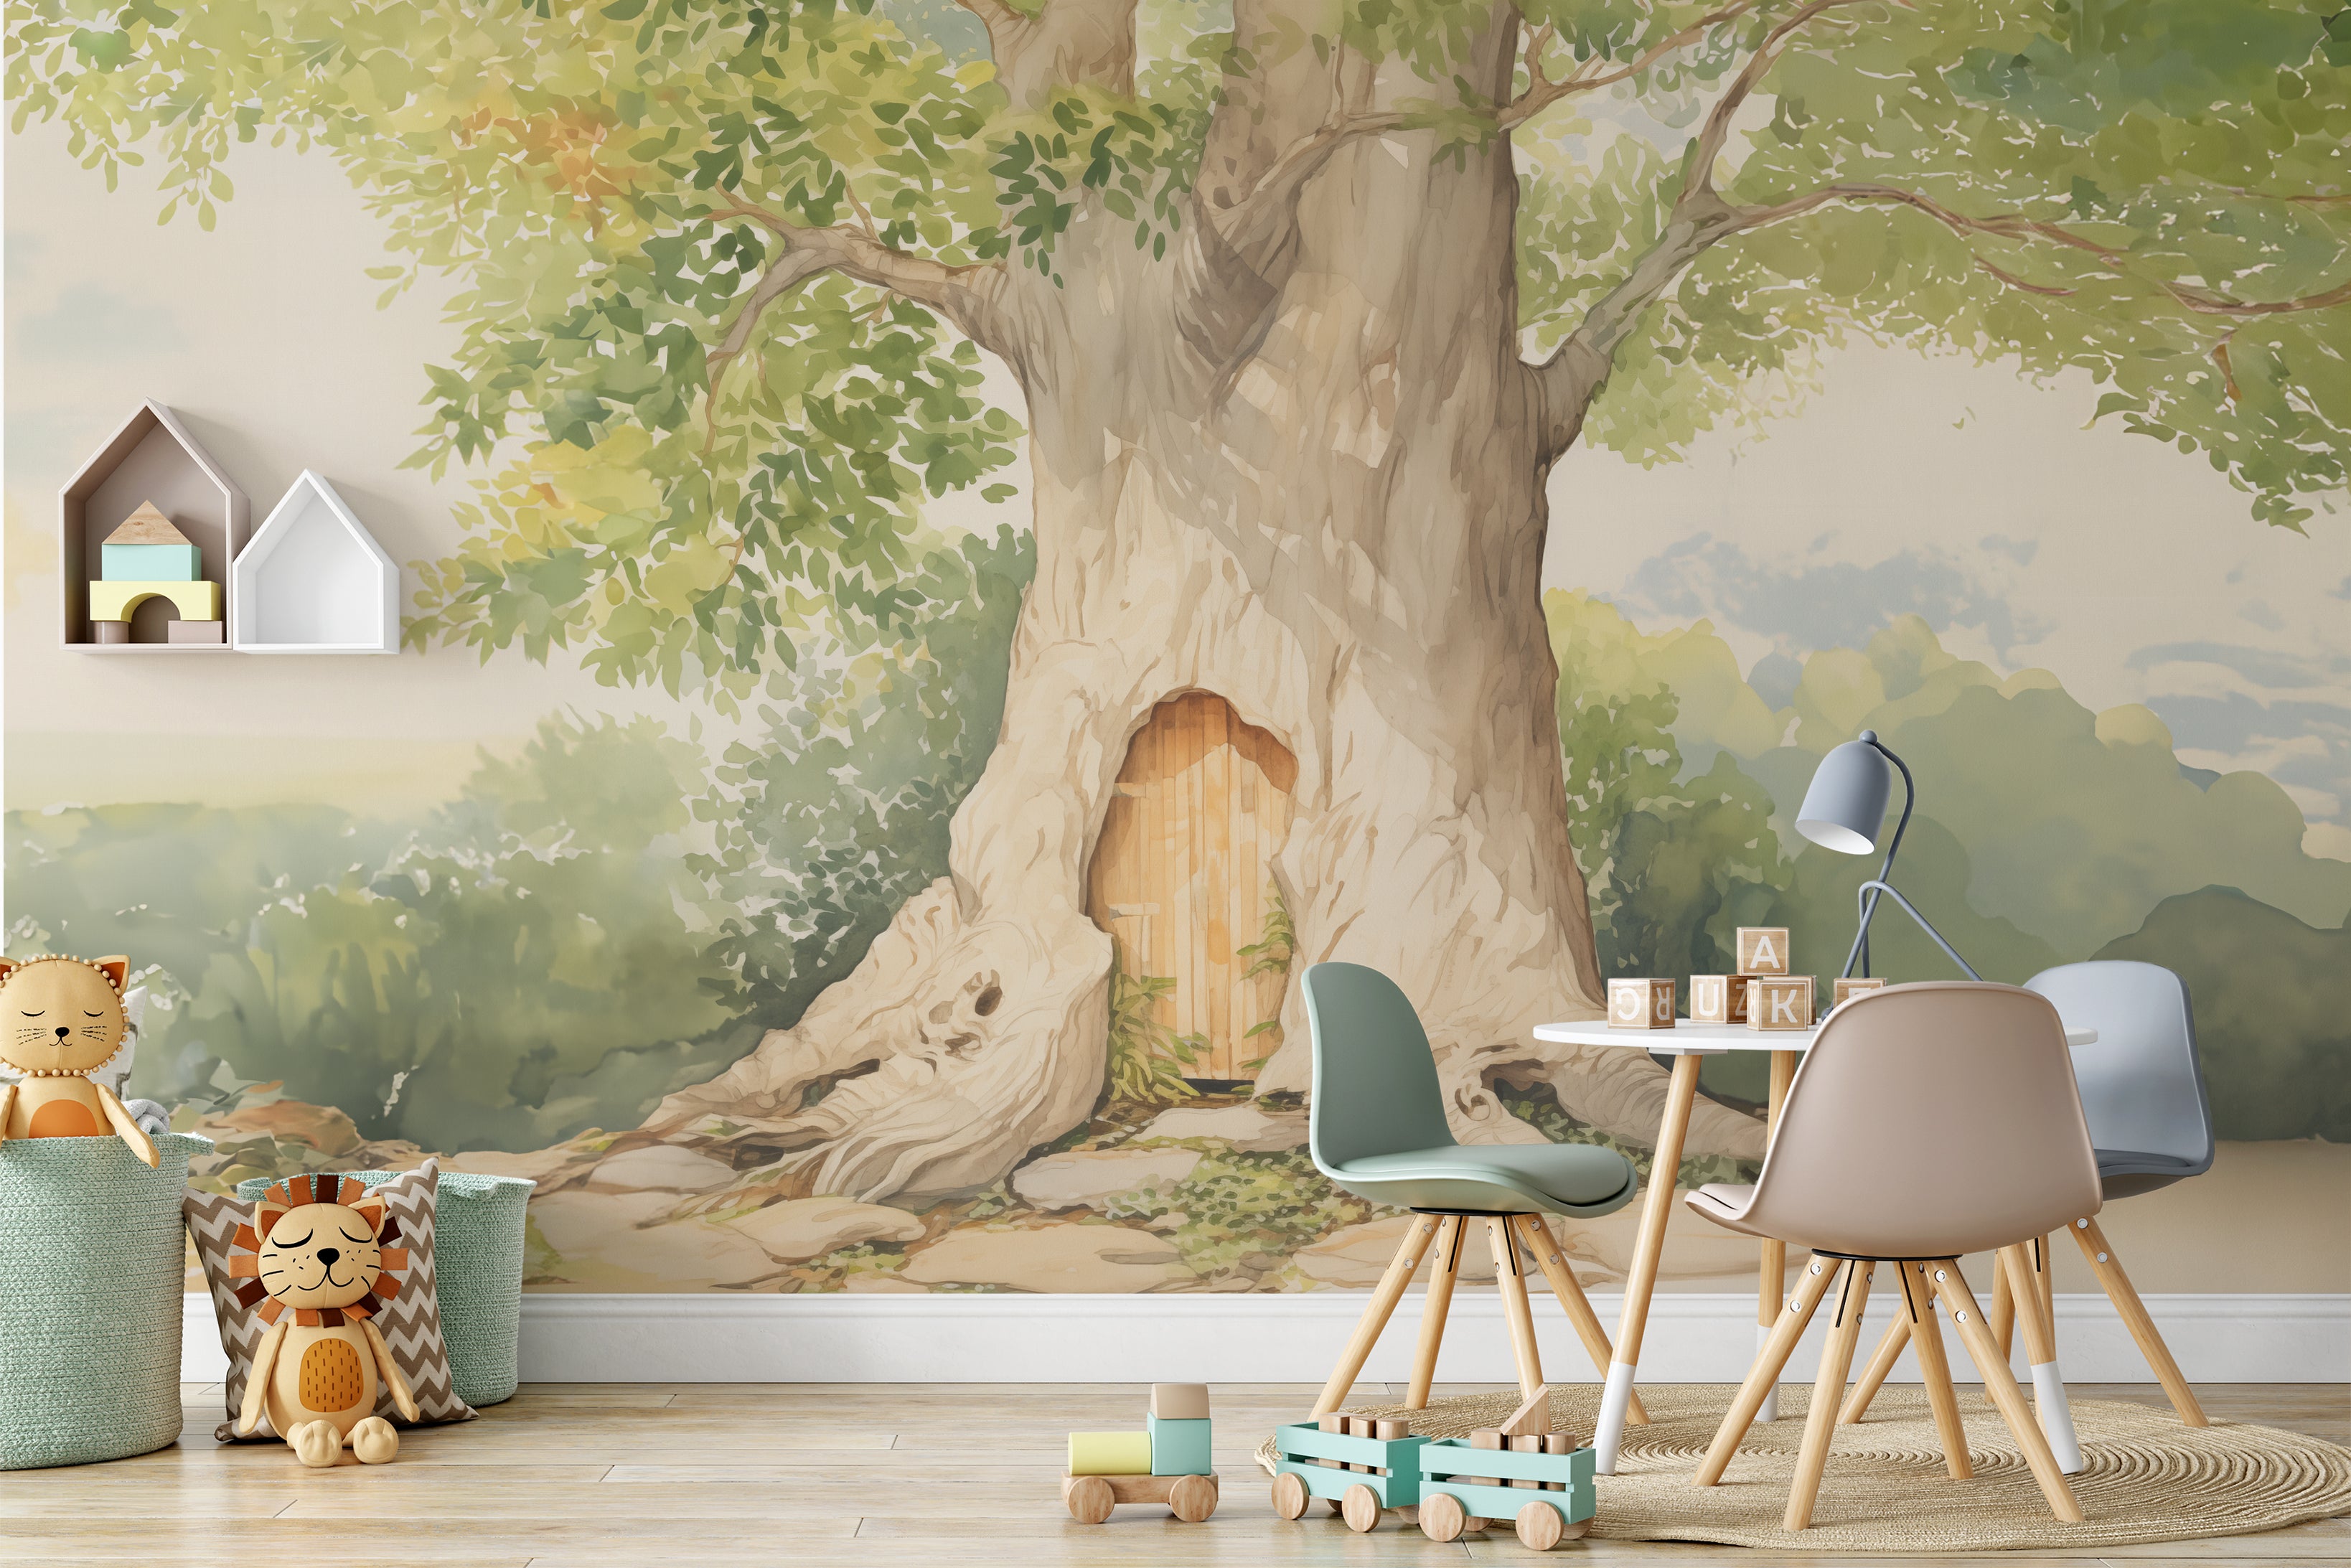 A children's room featuring a large mural of a tree with a door in its trunk, styled as Winnie the Pooh's house, surrounded by toys and children's furniture under a canopy of green leaves.